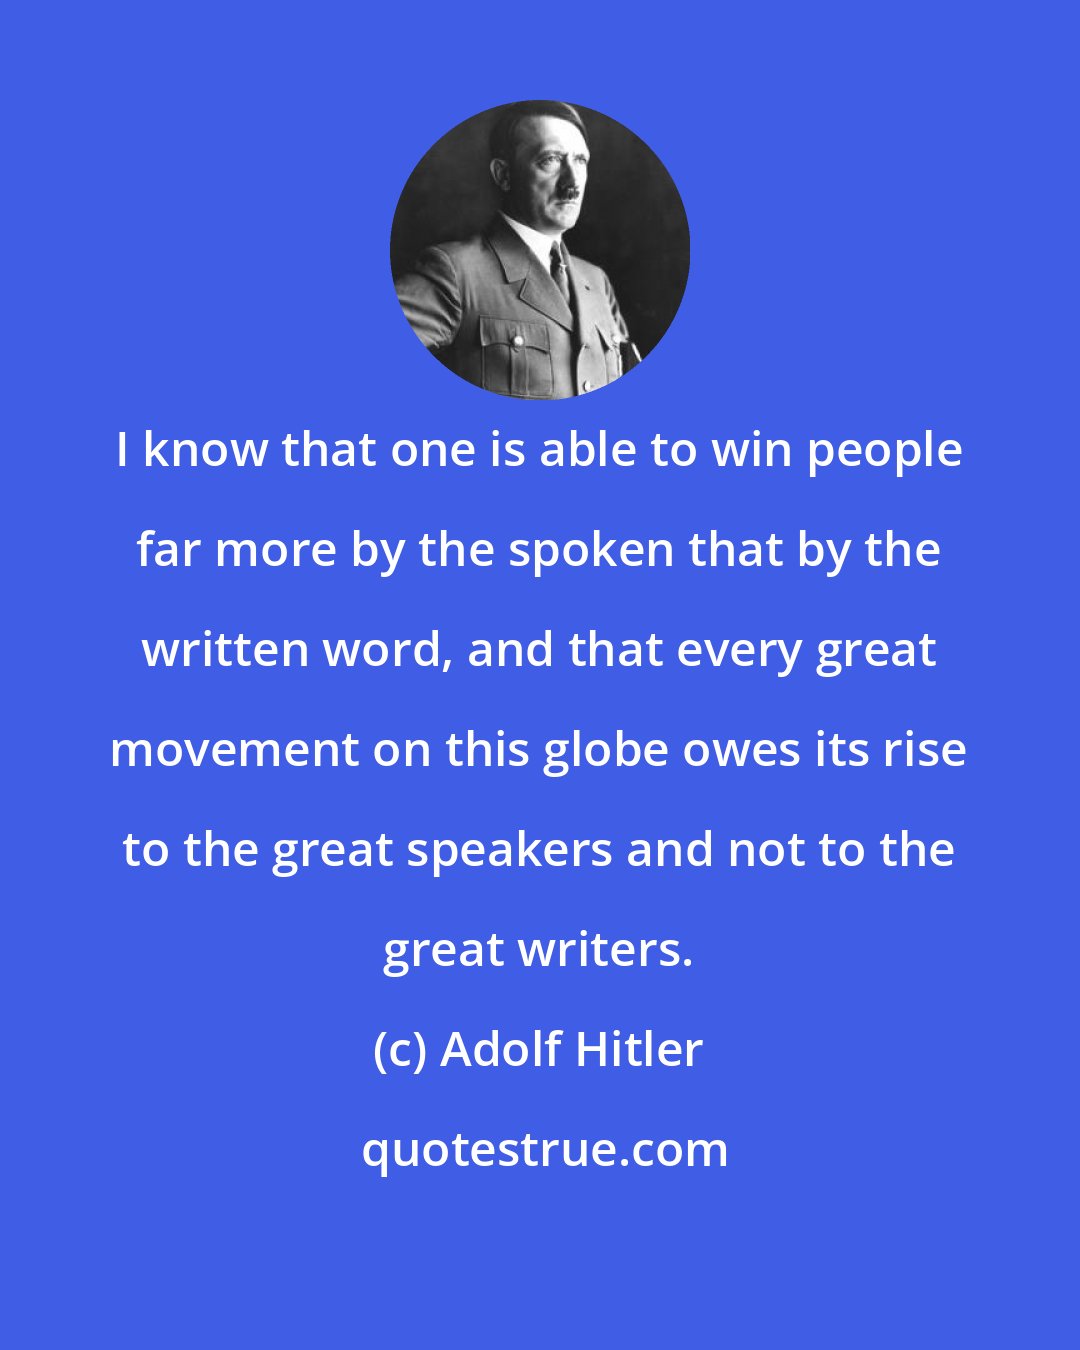 Adolf Hitler: I know that one is able to win people far more by the spoken that by the written word, and that every great movement on this globe owes its rise to the great speakers and not to the great writers.